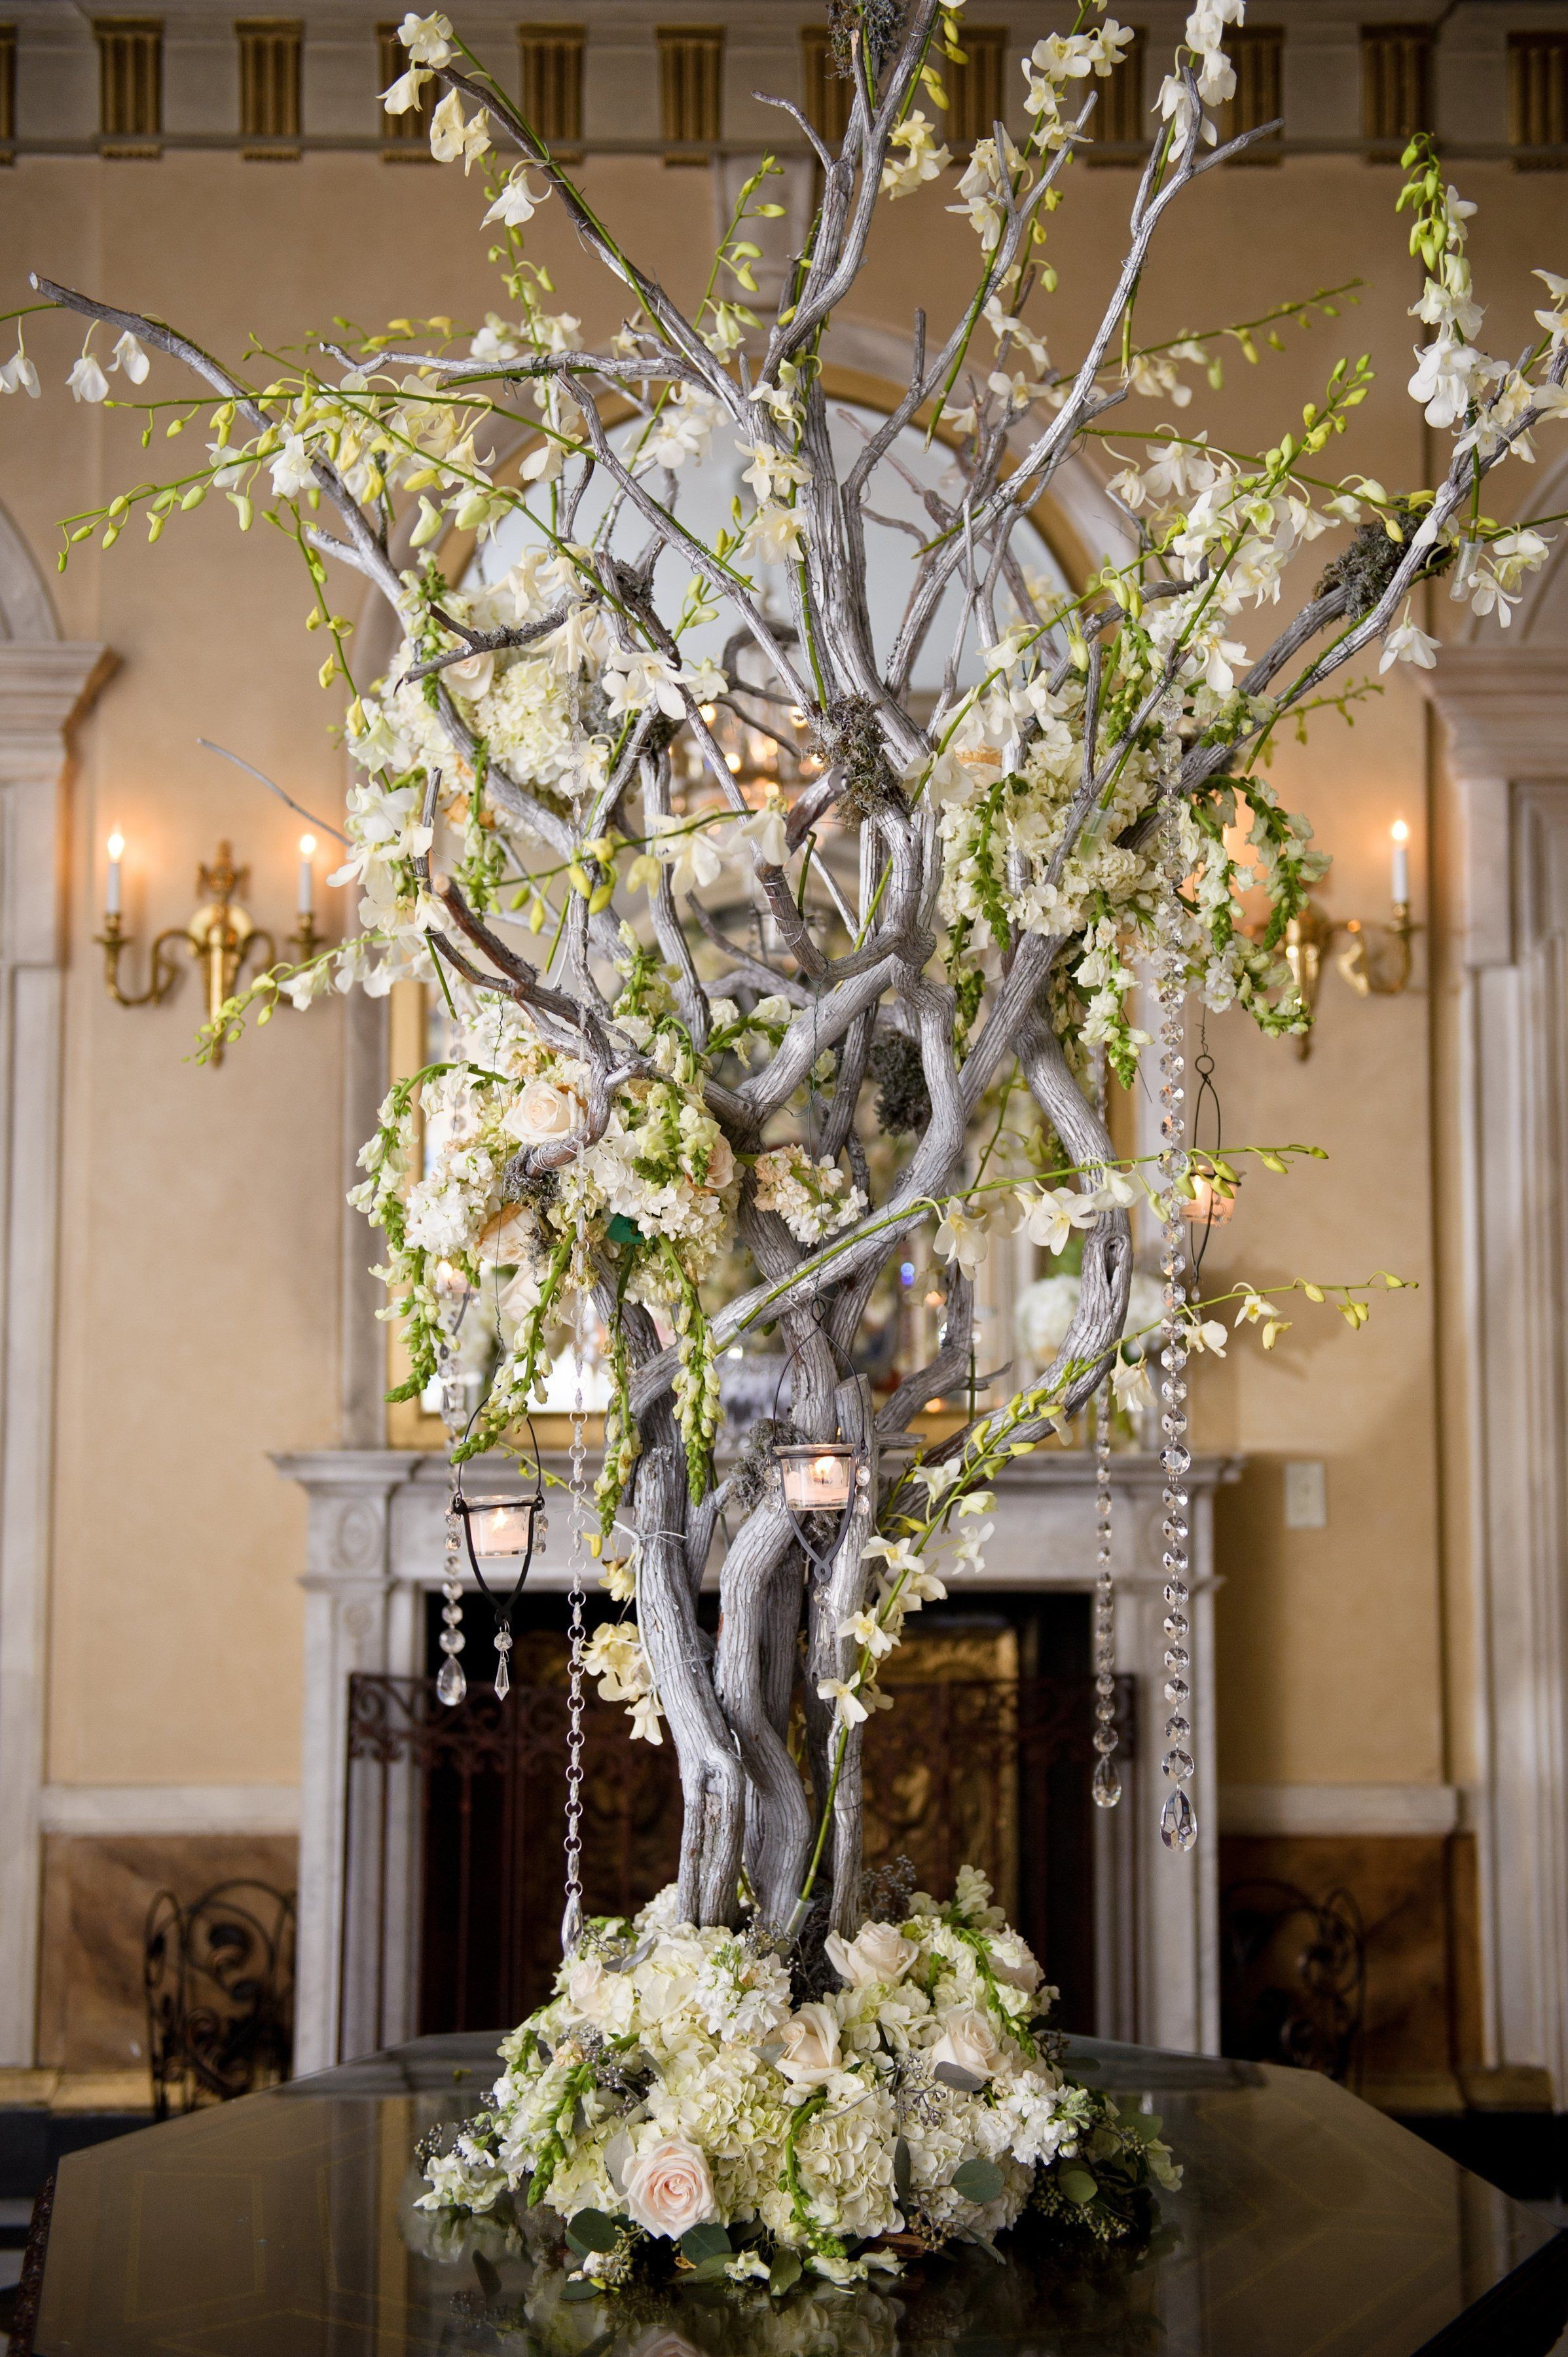 16 Wonderful White Glass Vase 2024 free download white glass vase of decorative branches for weddings awesome tall vase centerpiece ideas inside decorative branches for weddings best of a tall arrangement of manzanita branches dripping wit